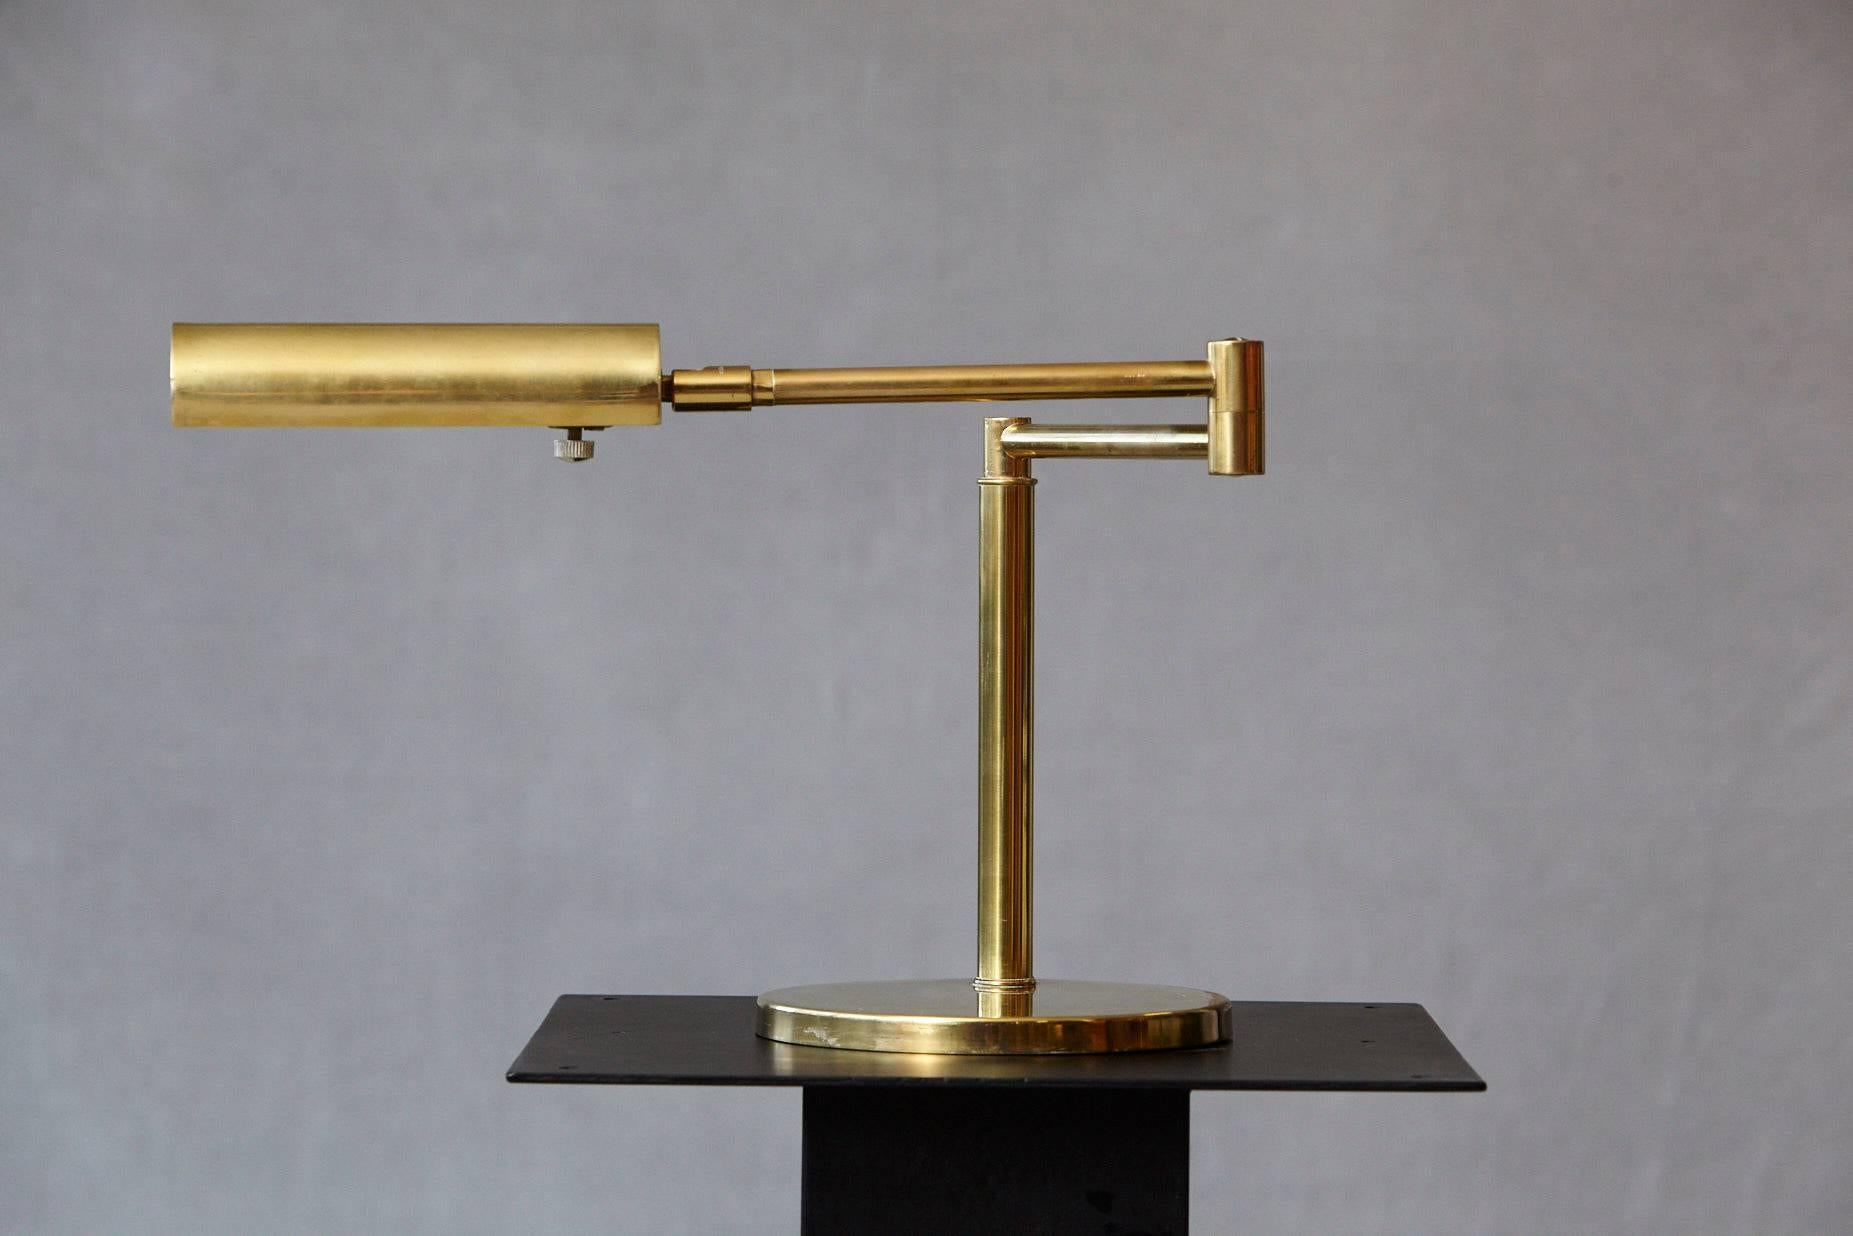 Brass swing arm table lamp by Koch & Lowy with adjustable shade and dimmable switch, marked Koch & Lowy on arm.
The arm is fully extended 27 in long.
Some minor scratches to brass base otherwise great patina.